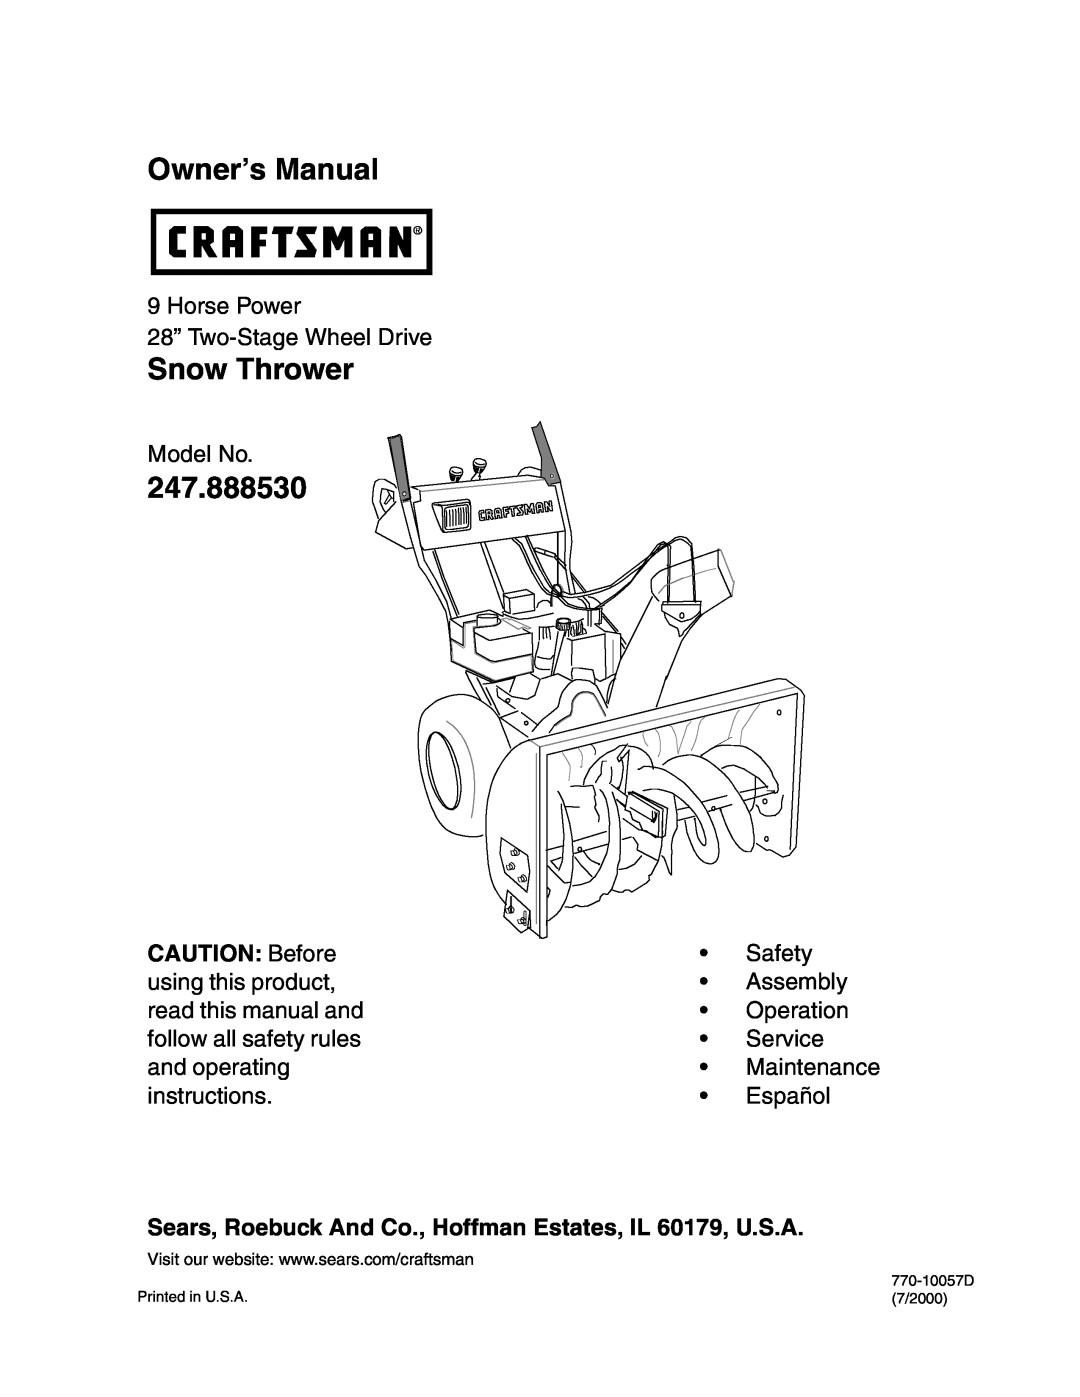 Craftsman 247.88853 owner manual CAUTION Before, Sears, Roebuck And Co., Hoffman Estates, IL 60179, U.S.A, Snow Thrower 